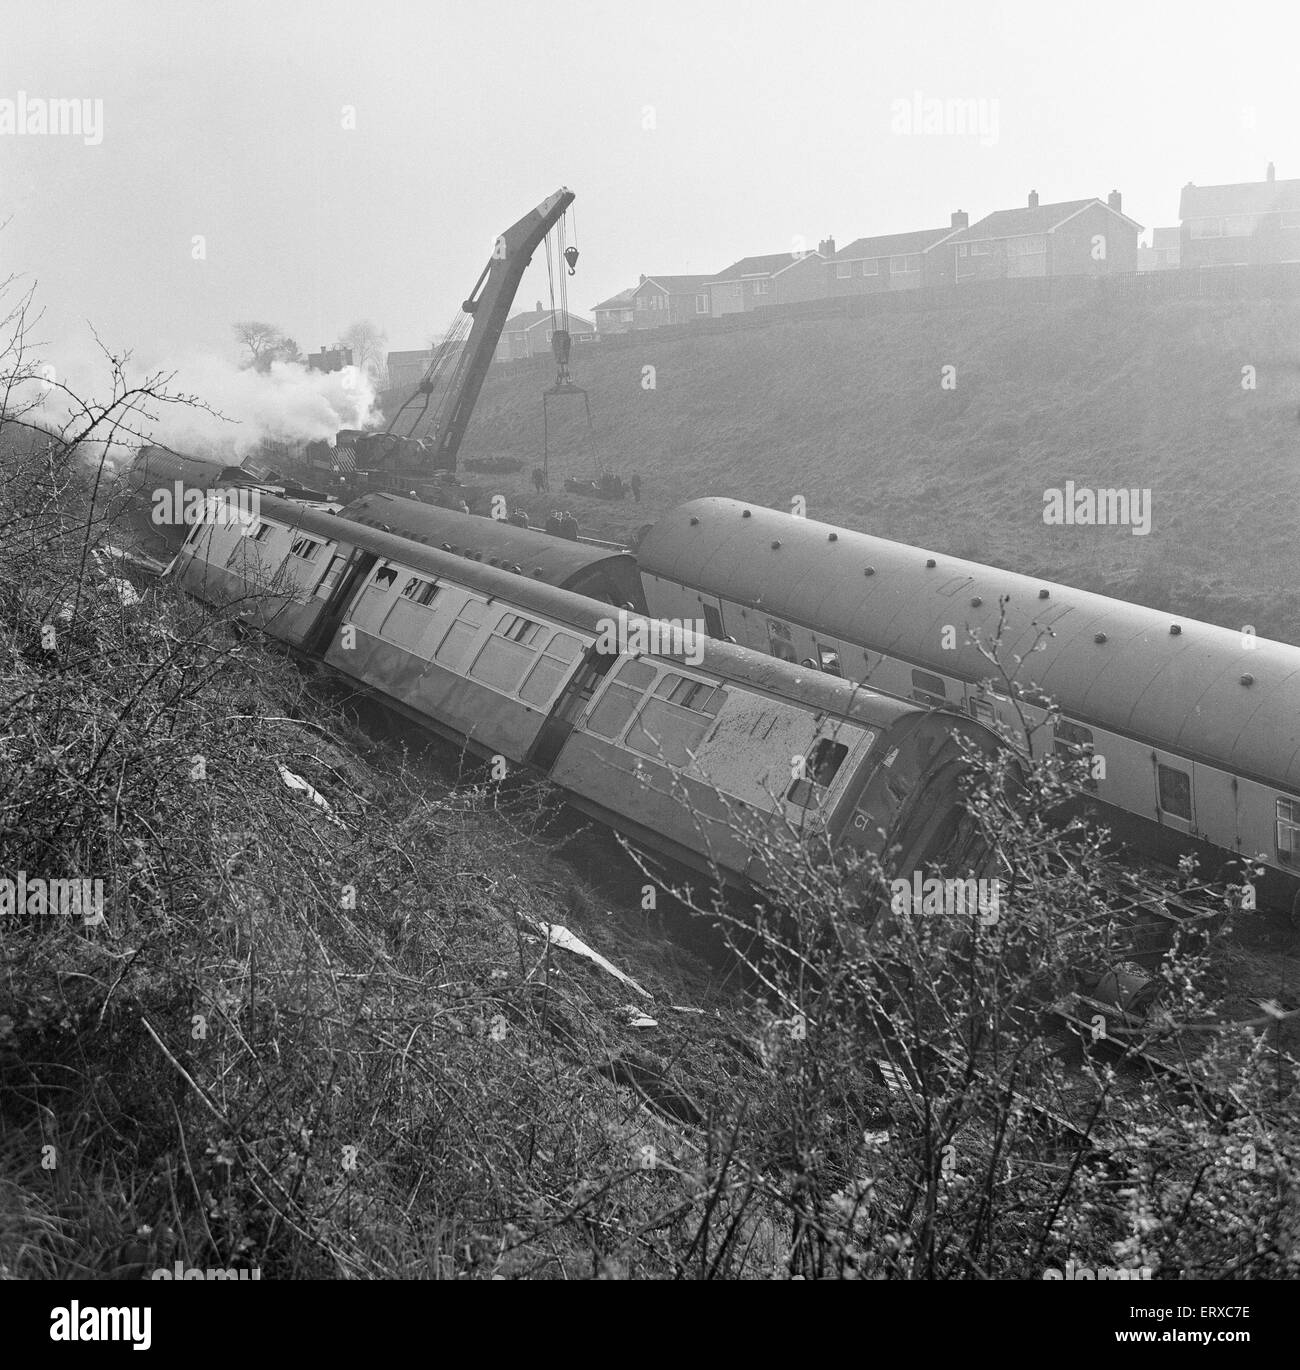 Morpeth Rail Crash On 7 May 1969 a northbound sleeper express train from London to Aberdeen derailed on the Morpeth curve. Six people were killed, 21 were injured and the roof of the station's northbound platform was damaged. Stock Photo